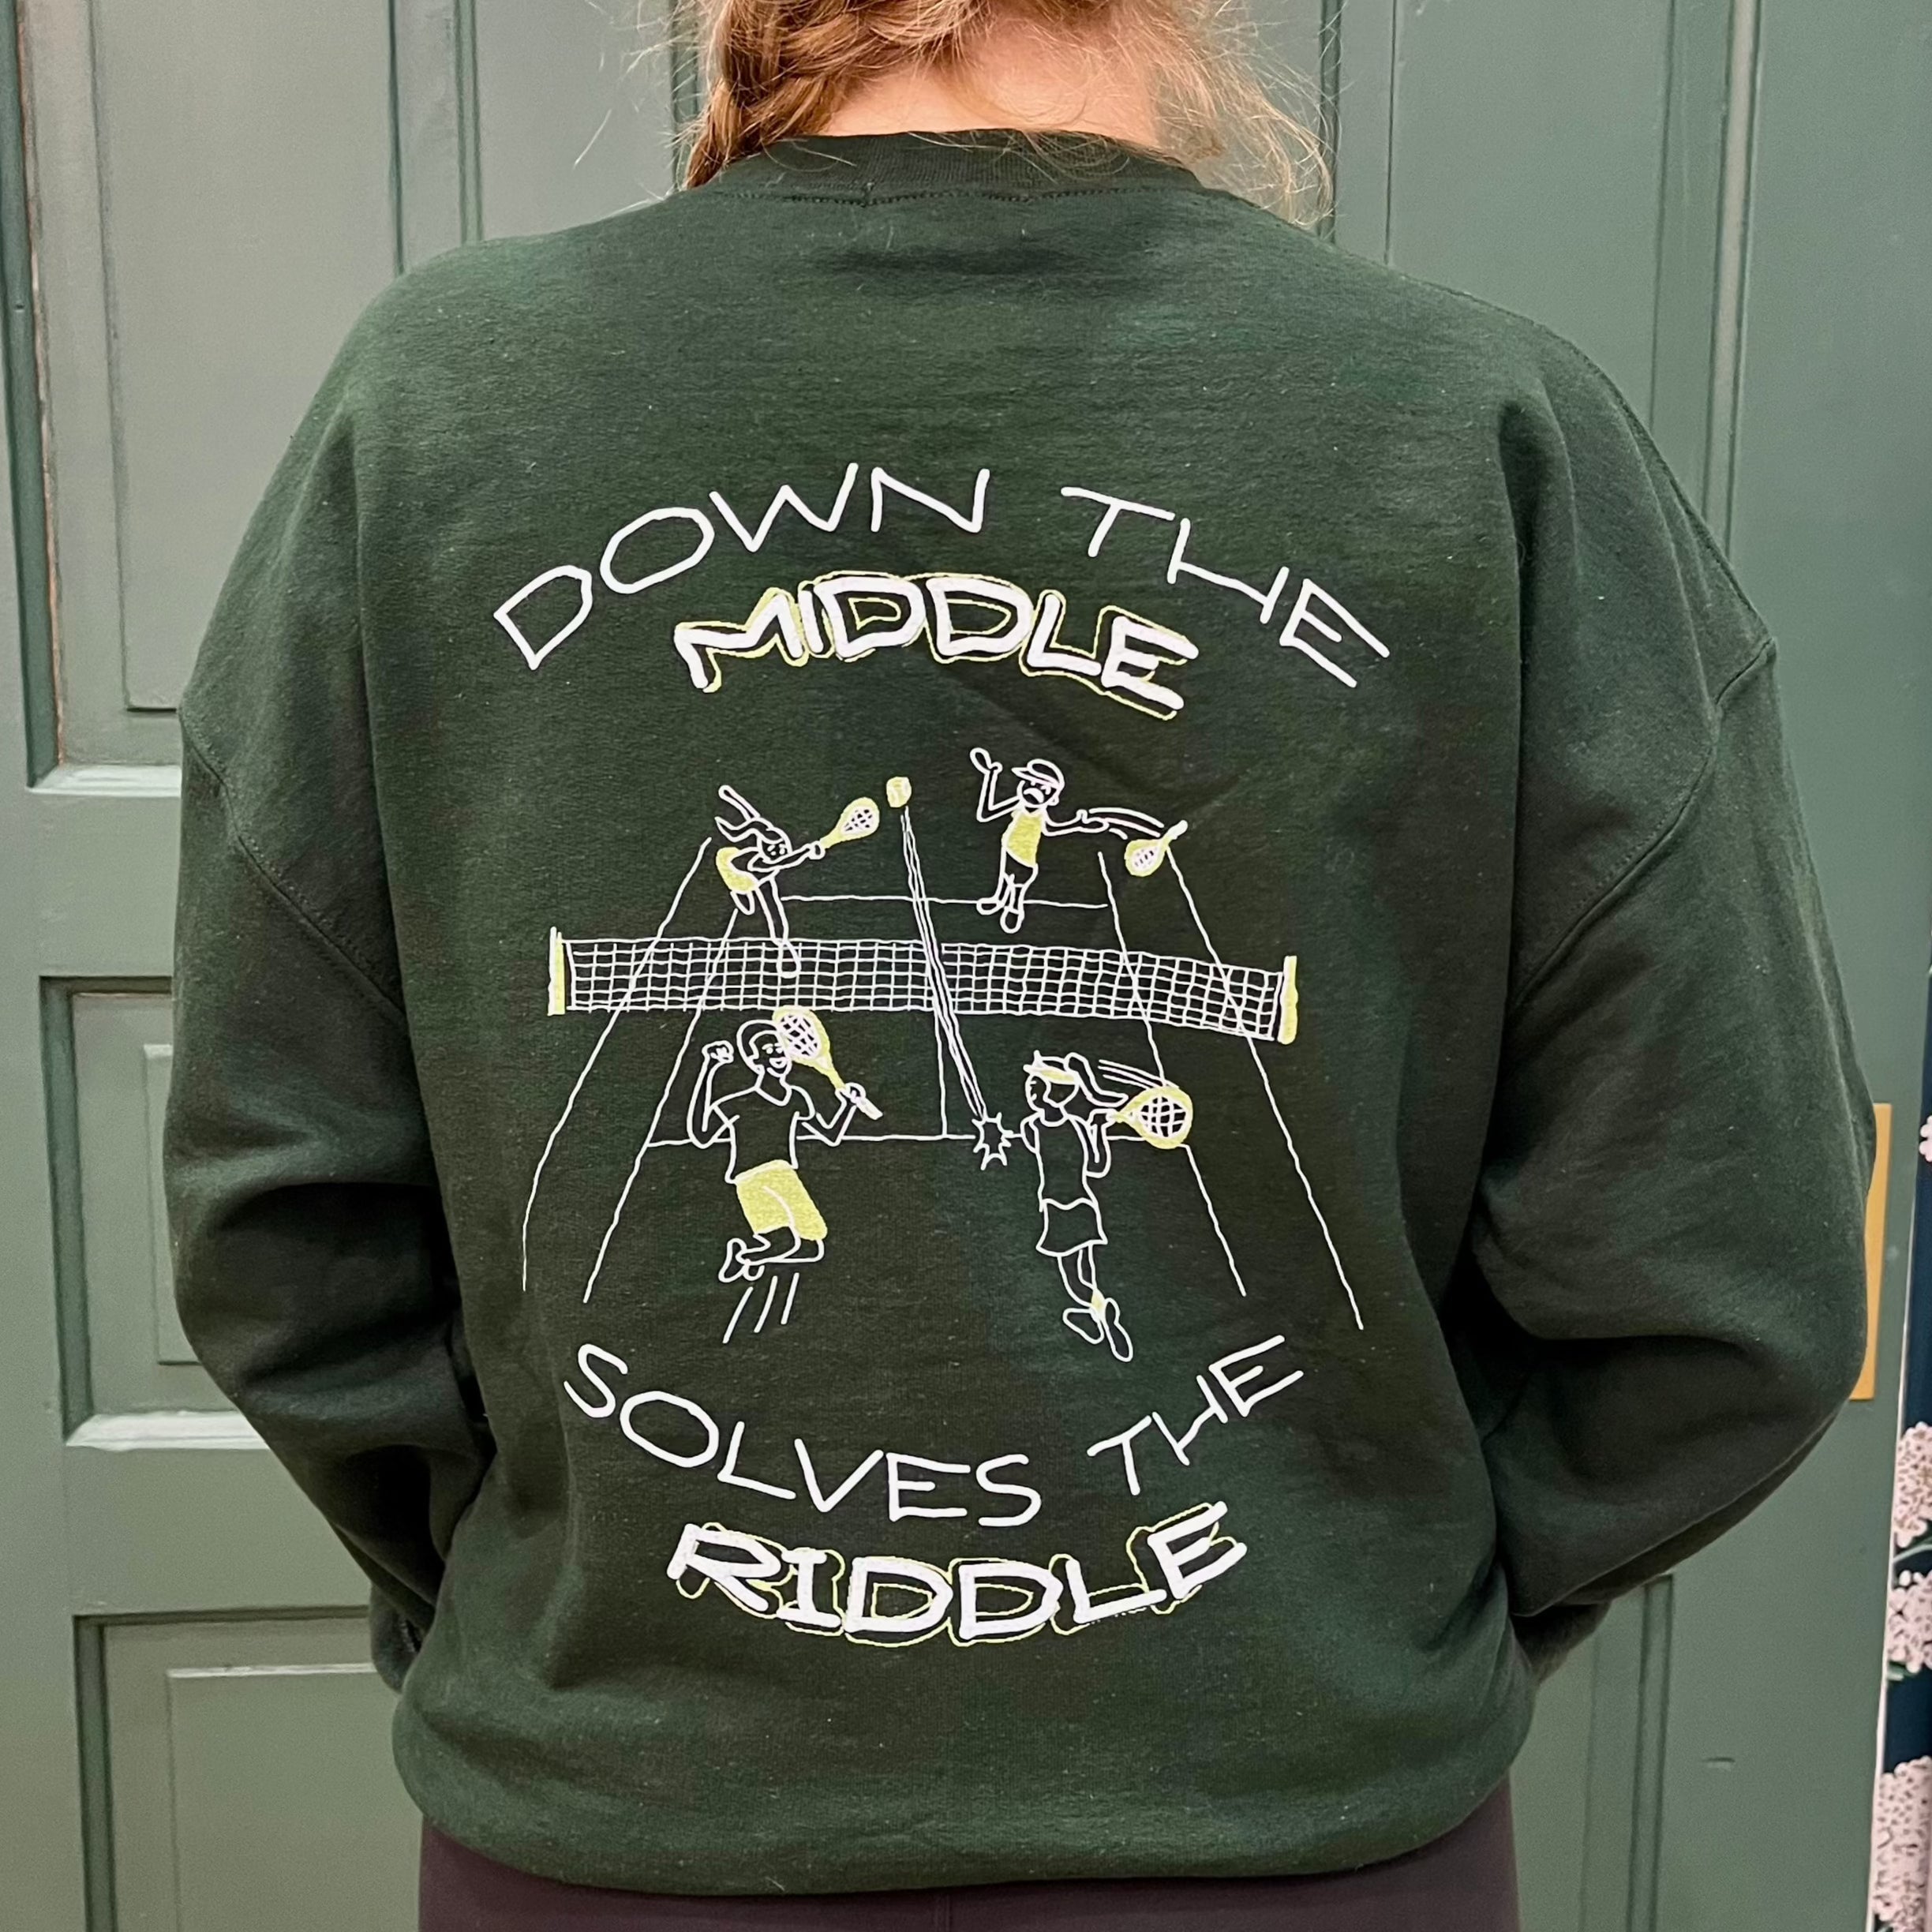 Down the Middle Sweatshirt